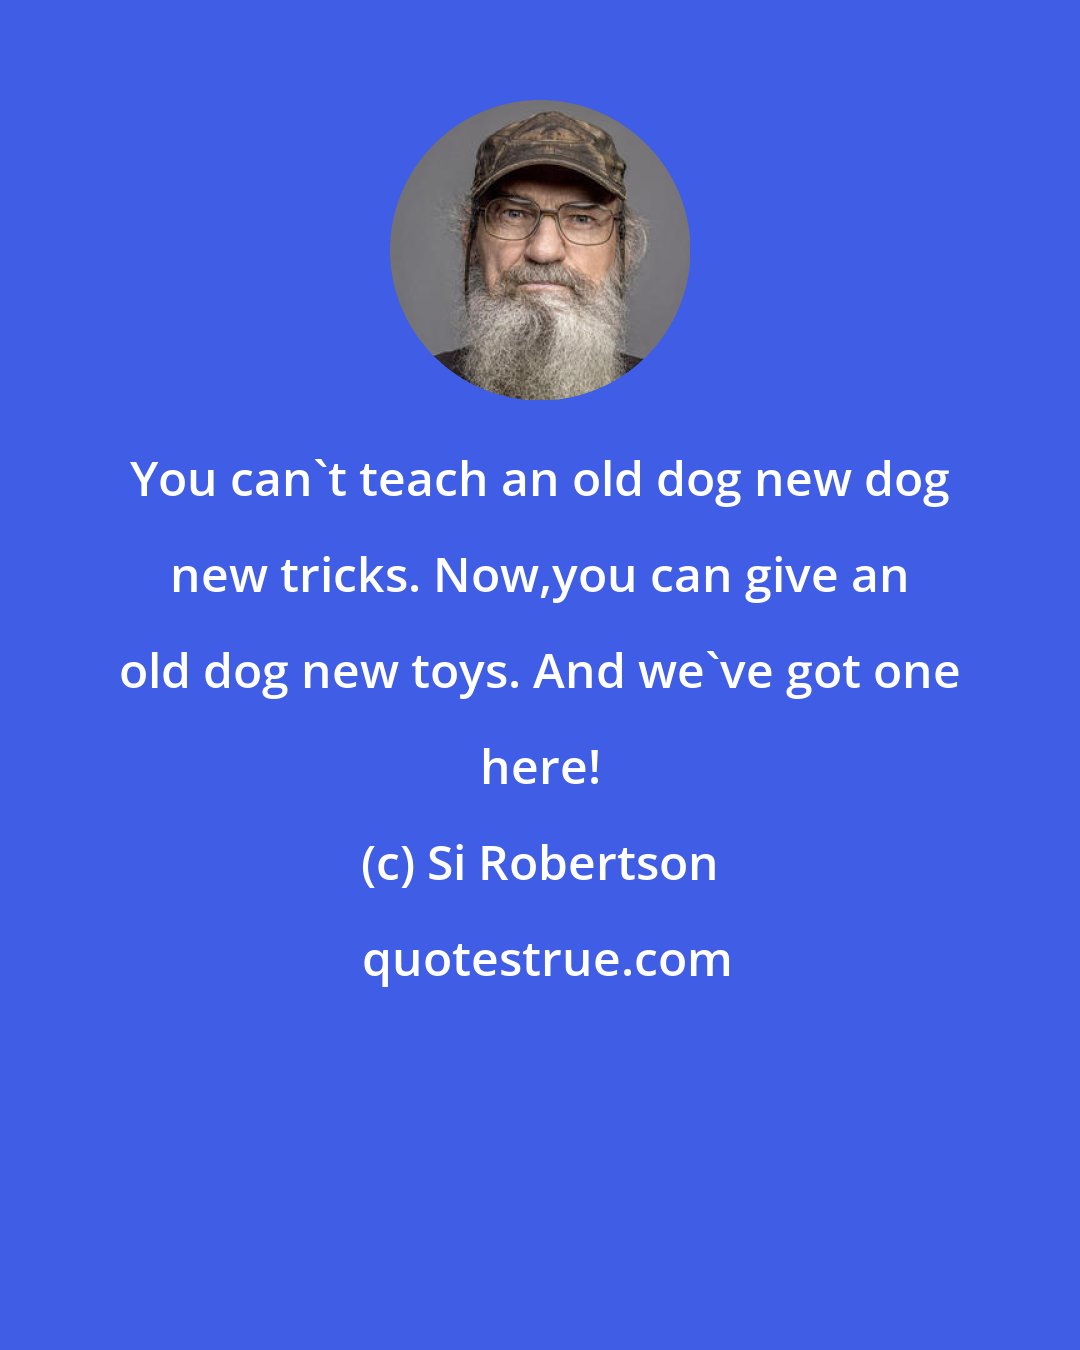 Si Robertson: You can't teach an old dog new dog new tricks. Now,you can give an old dog new toys. And we've got one here!